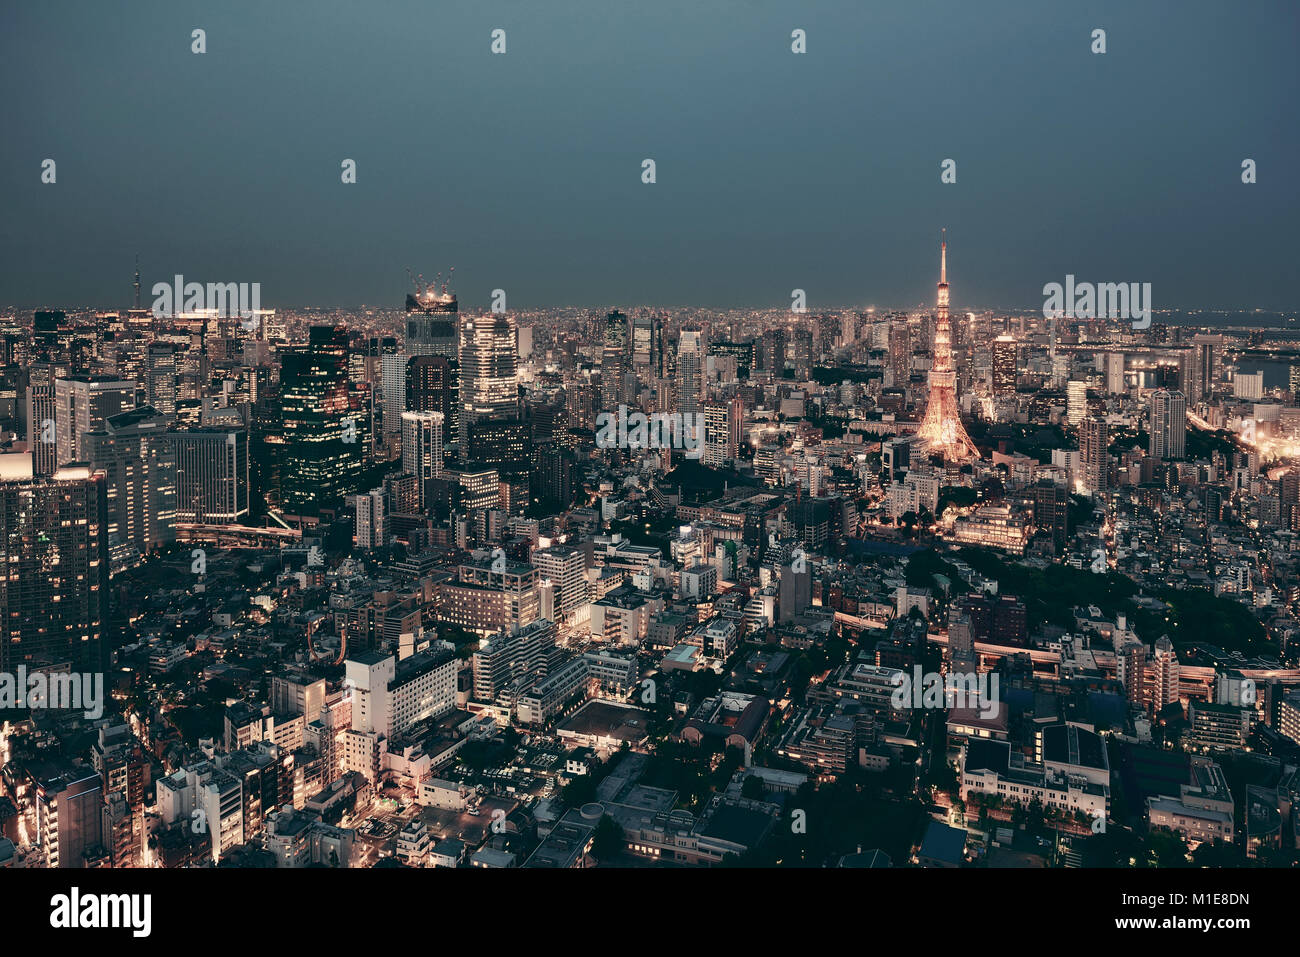 Tokyo Tower and urban skyline rooftop view at night, Japan. Stock Photo